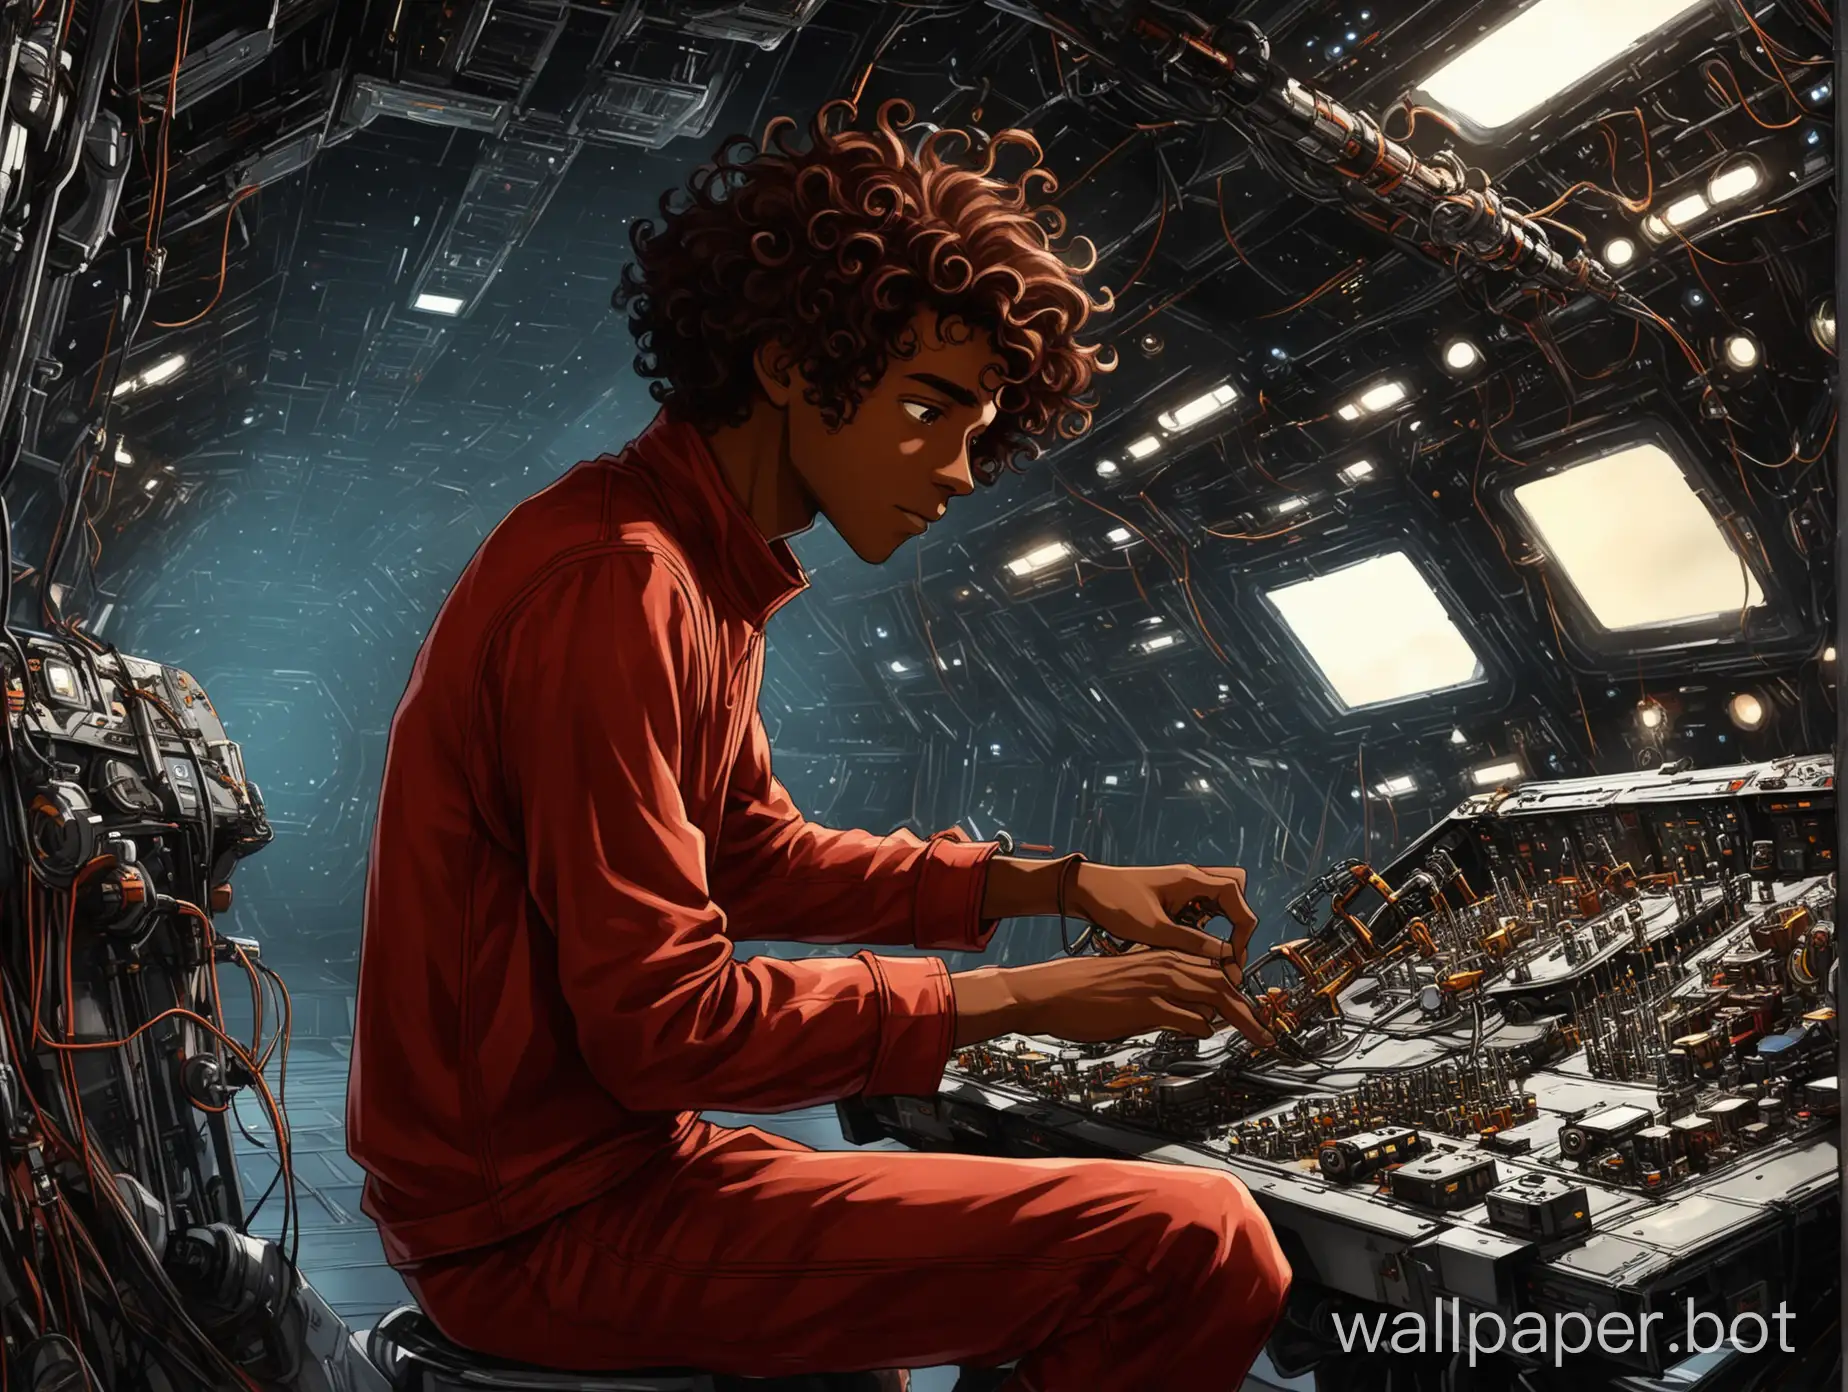 Young-Ebony-Guy-Tinkering-in-Spaceship-Hangar-for-Band-Equipment